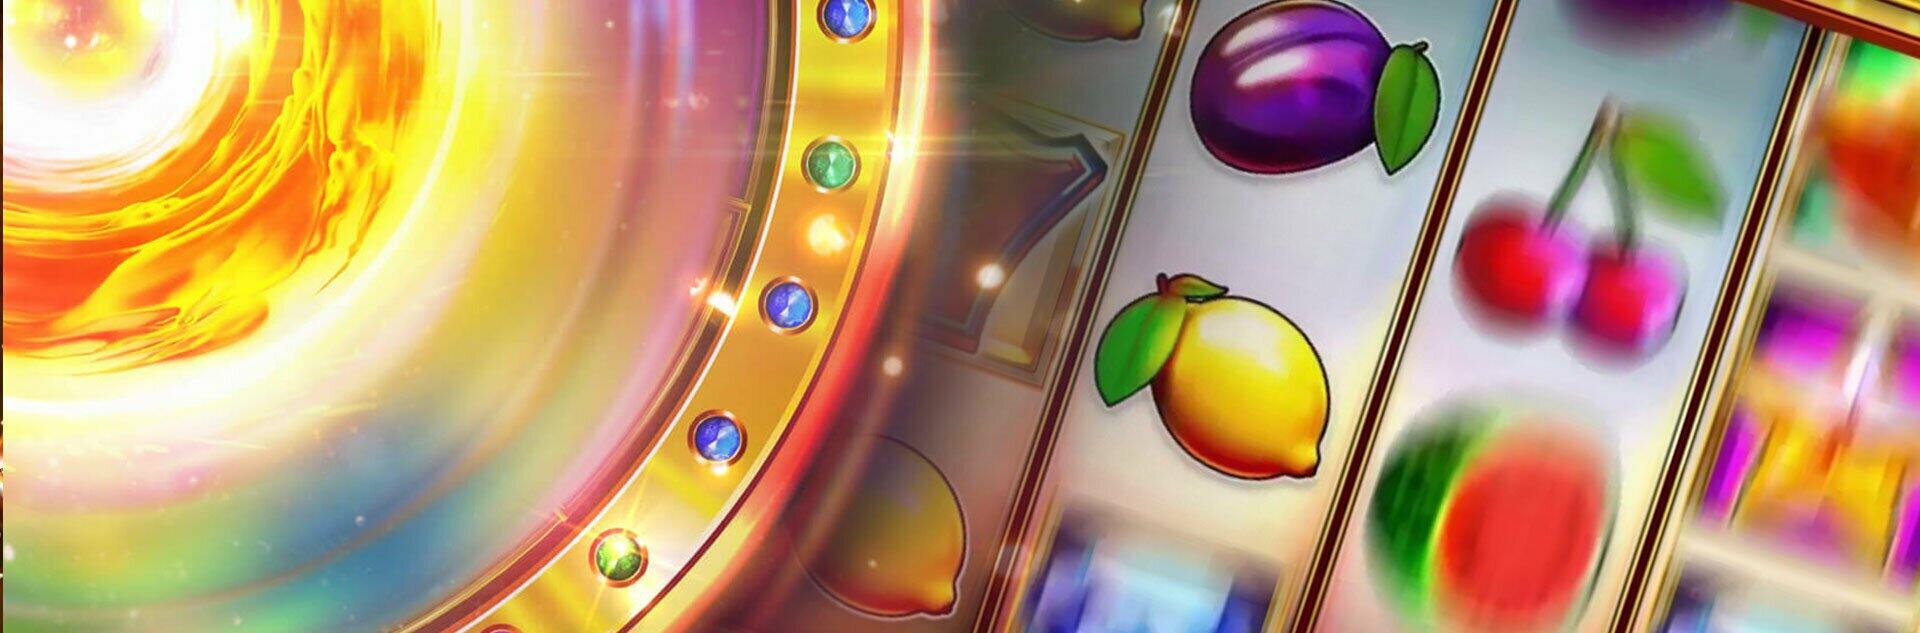 Hot Spin Deluxe Slot